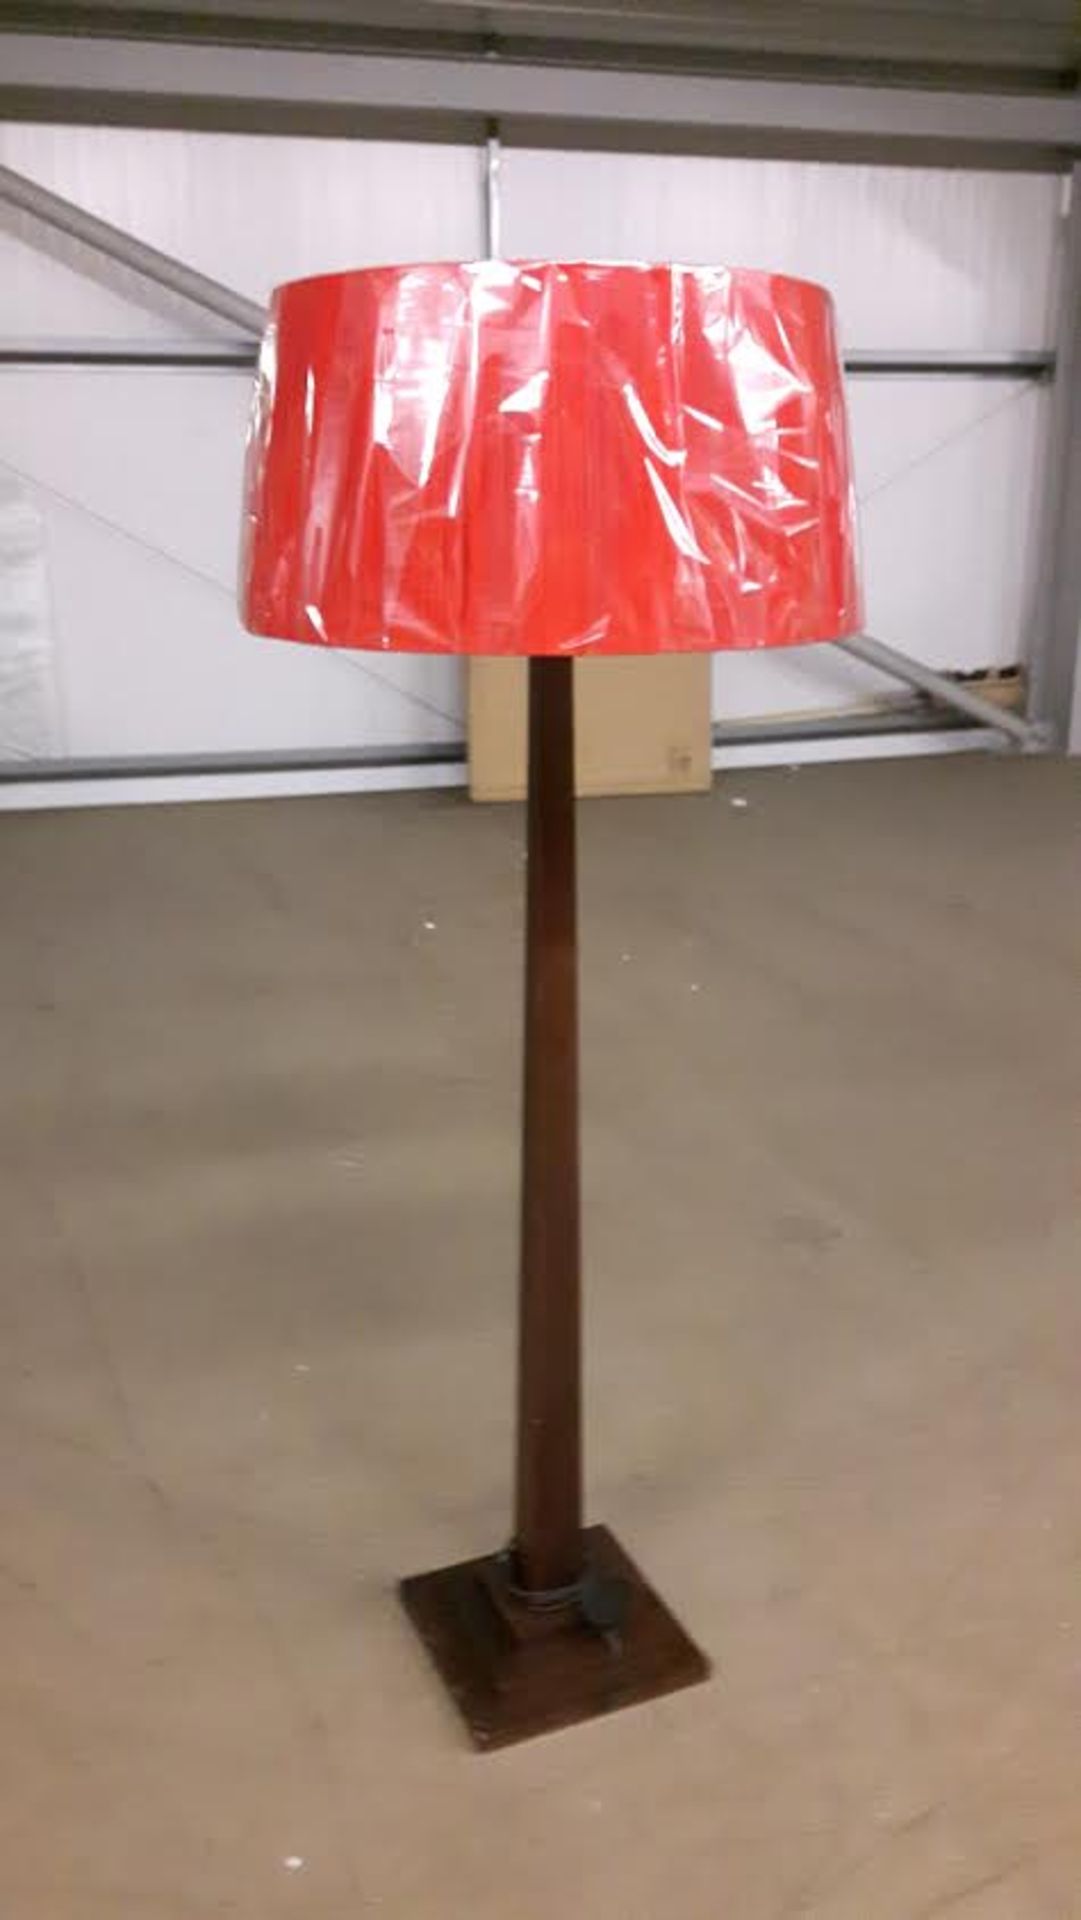 Wooden Floor Lamp with new red shade.